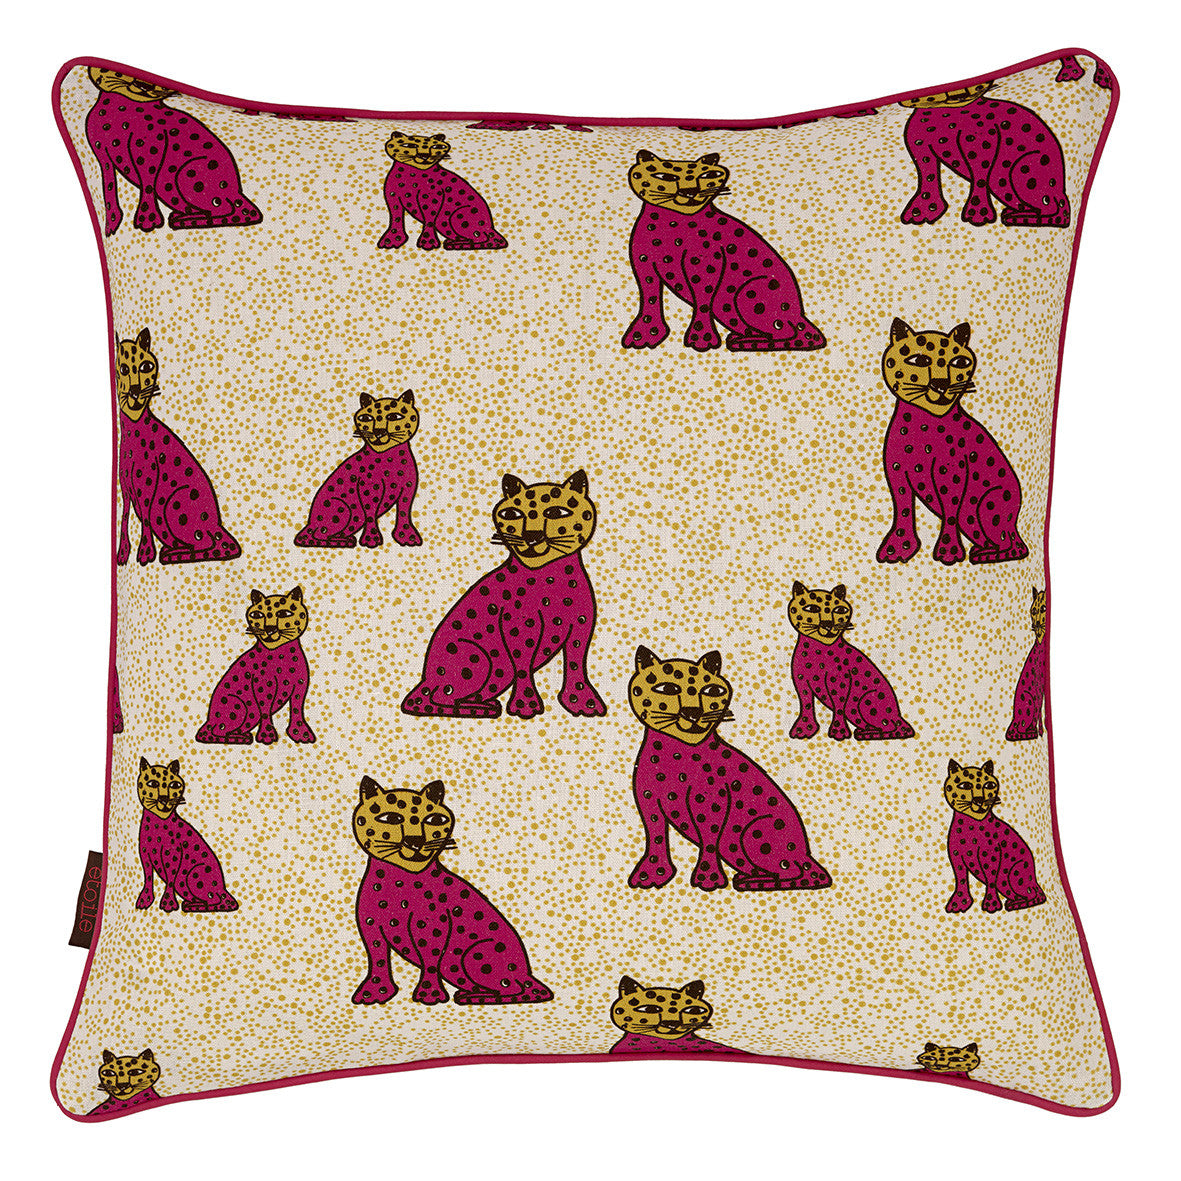 Graphic Leopard Pattern Linen Union Printed Decorative Throw Pillow in Fuchsia Pink & Chocolate Brown 45x45cm (18x18" pillow)